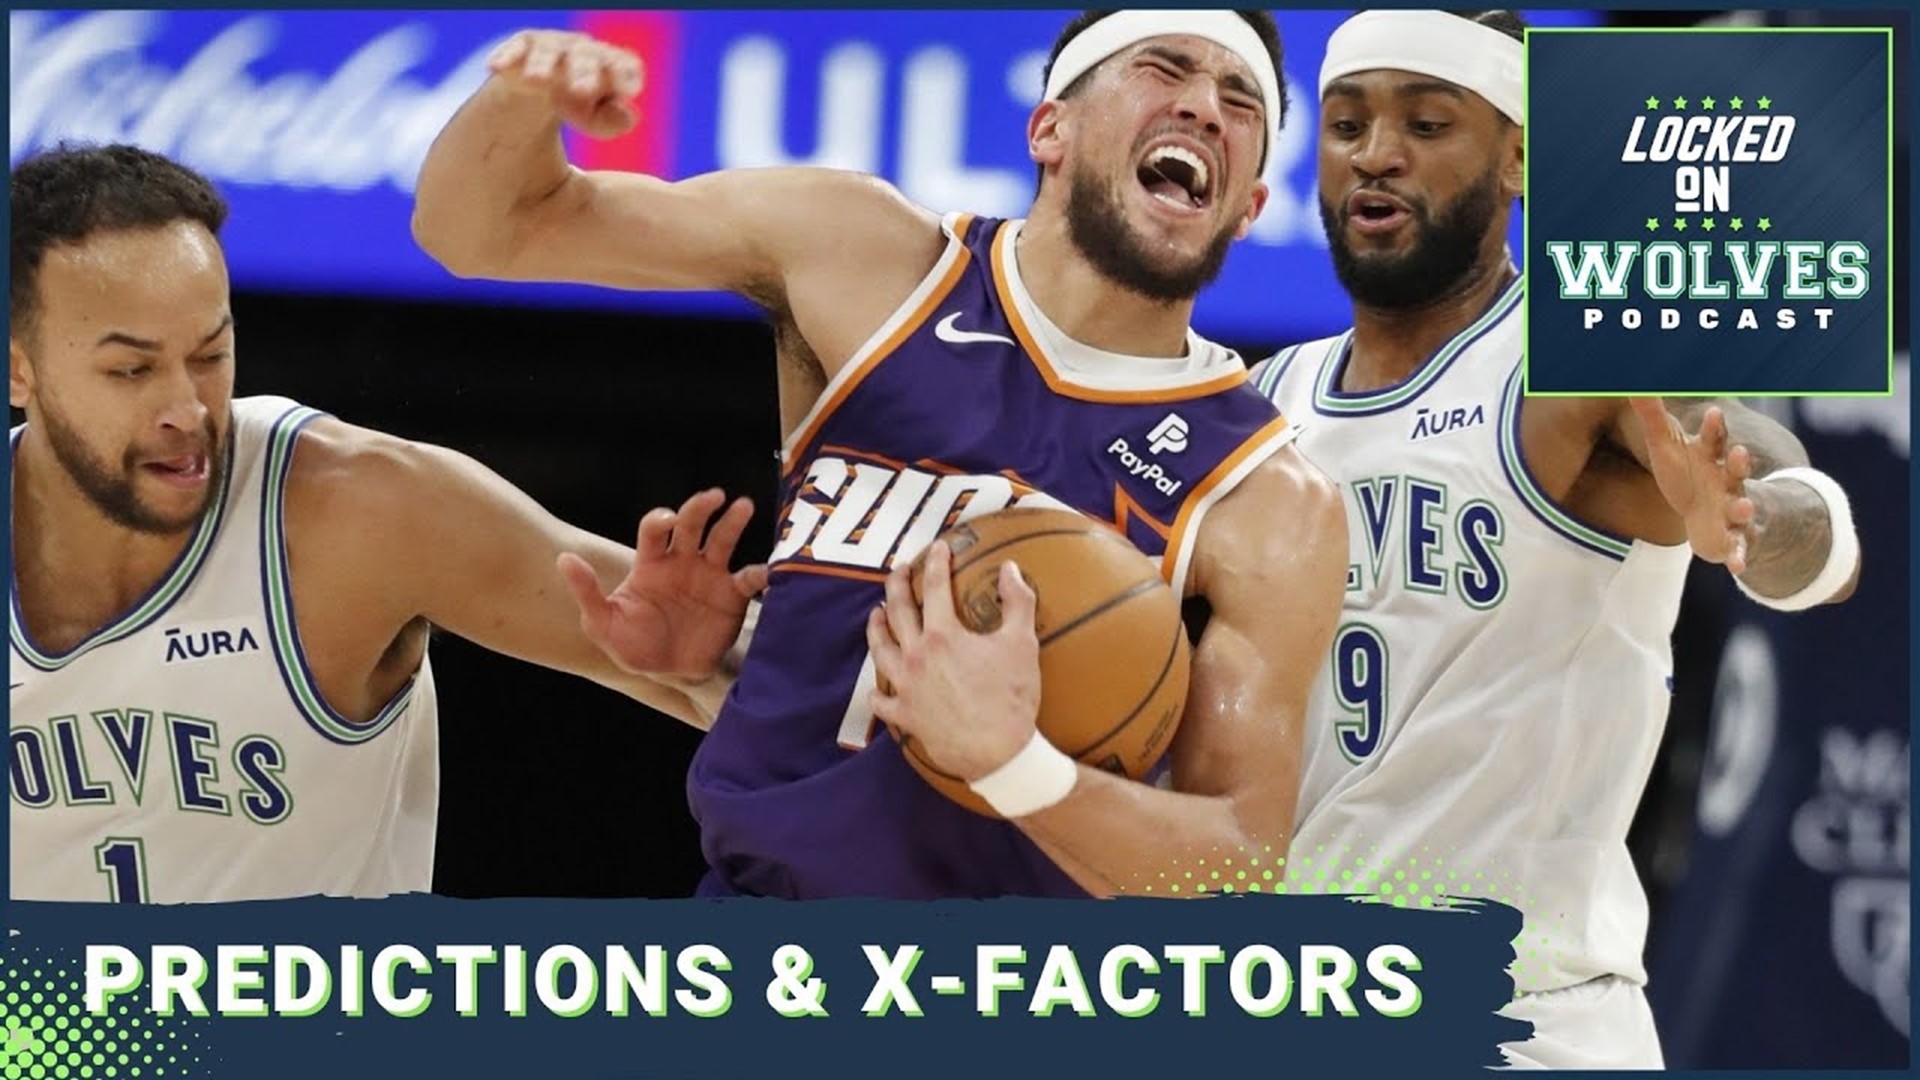 Bold predictions, X-factors, and final thoughts on the Minnesota Timberwolves' matchup with the Suns